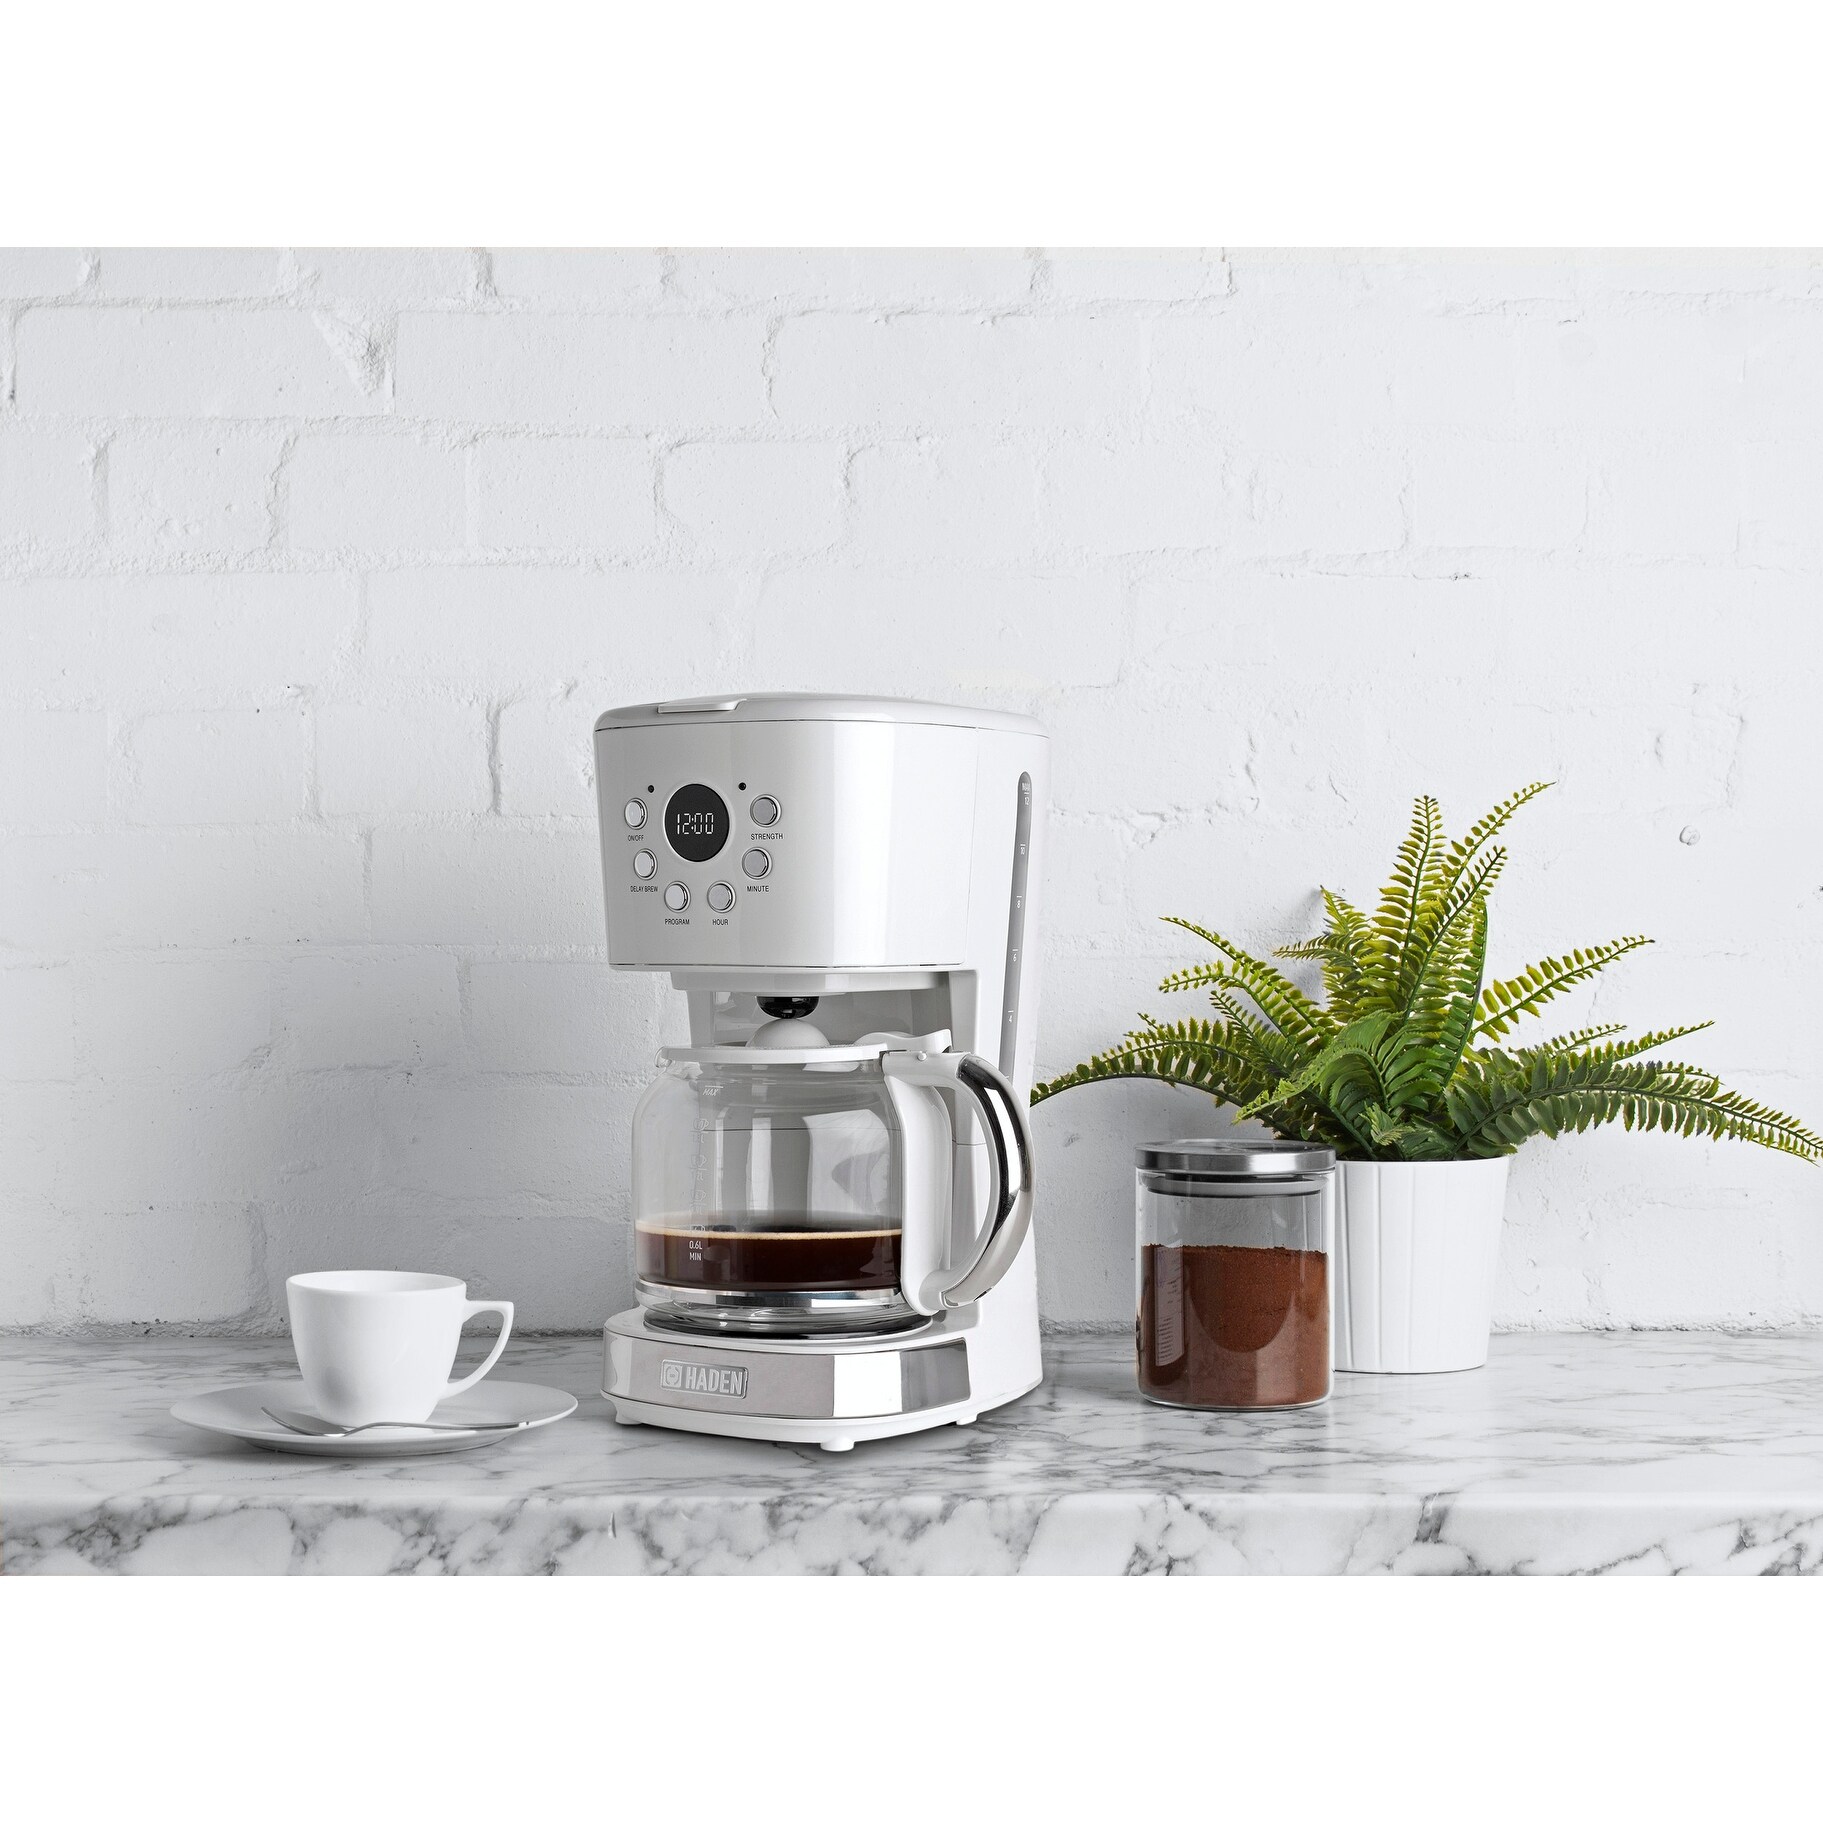 https://ak1.ostkcdn.com/images/products/is/images/direct/566cbebf03fe52cf452fe10dd40a208998237b02/Haden-Dorset-12-Cup-Programmable-Coffee-Maker-with-Strength-Control-in-Putty-Beige.jpg